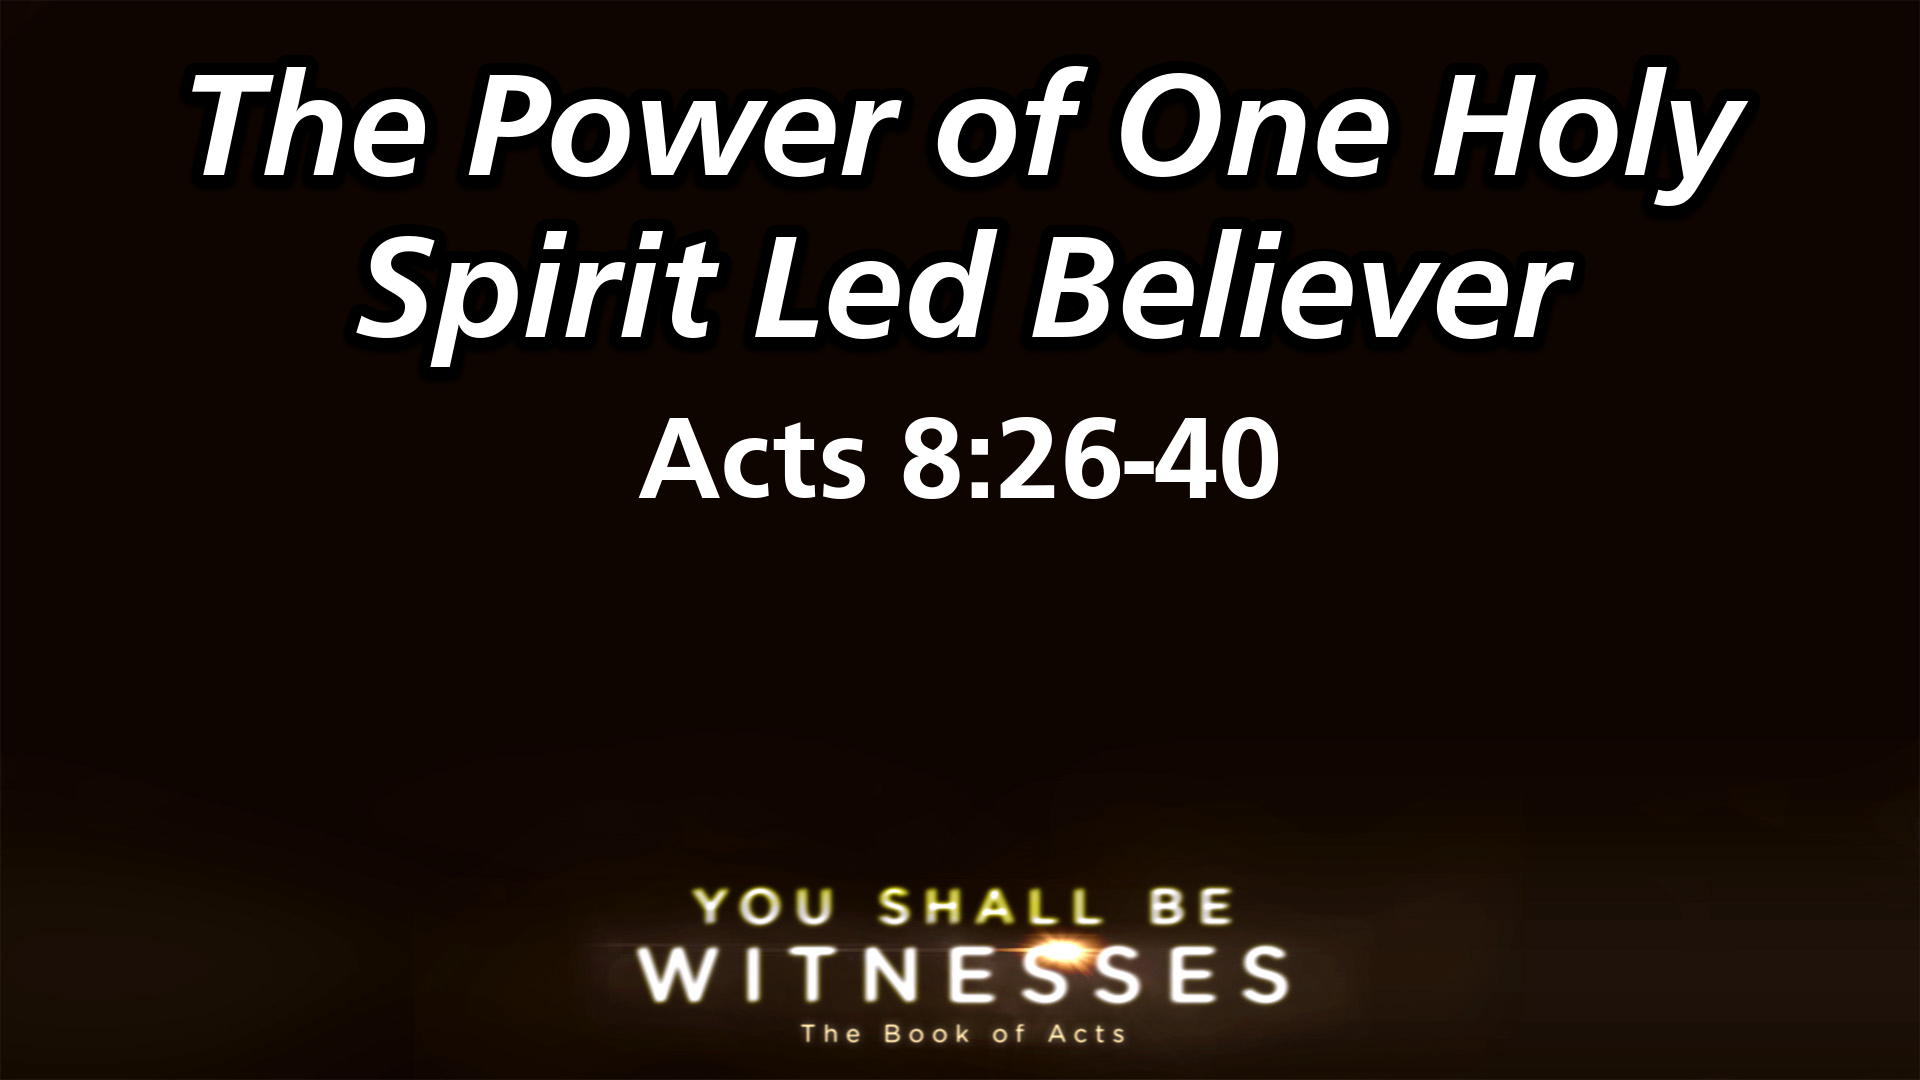 "The Power of One Holy Spirit Led Believer"